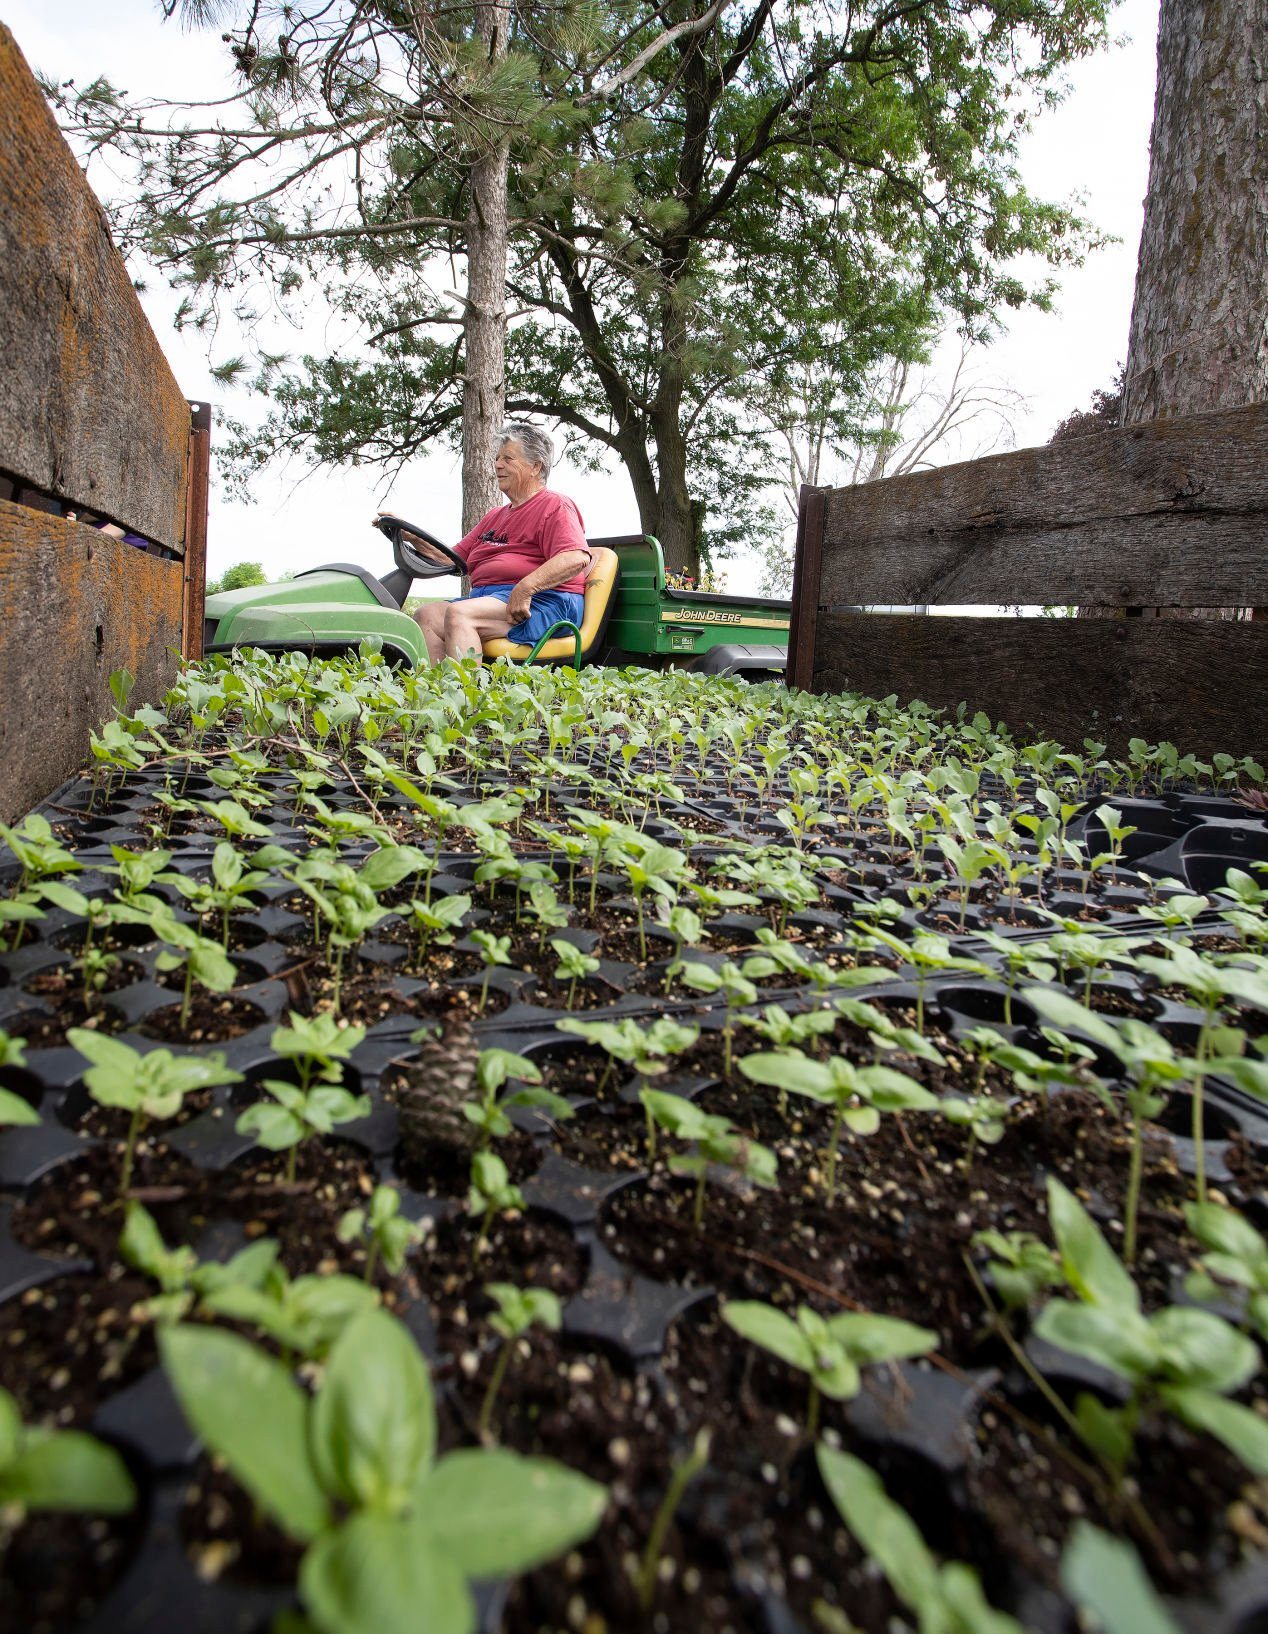 Carolann Kruse drives past a wagon filled with young kohlrabi on her family’s farm in rural Lancaster, Wis., on Wednesday, July 27, 2022.    PHOTO CREDIT: Stephen Gassman